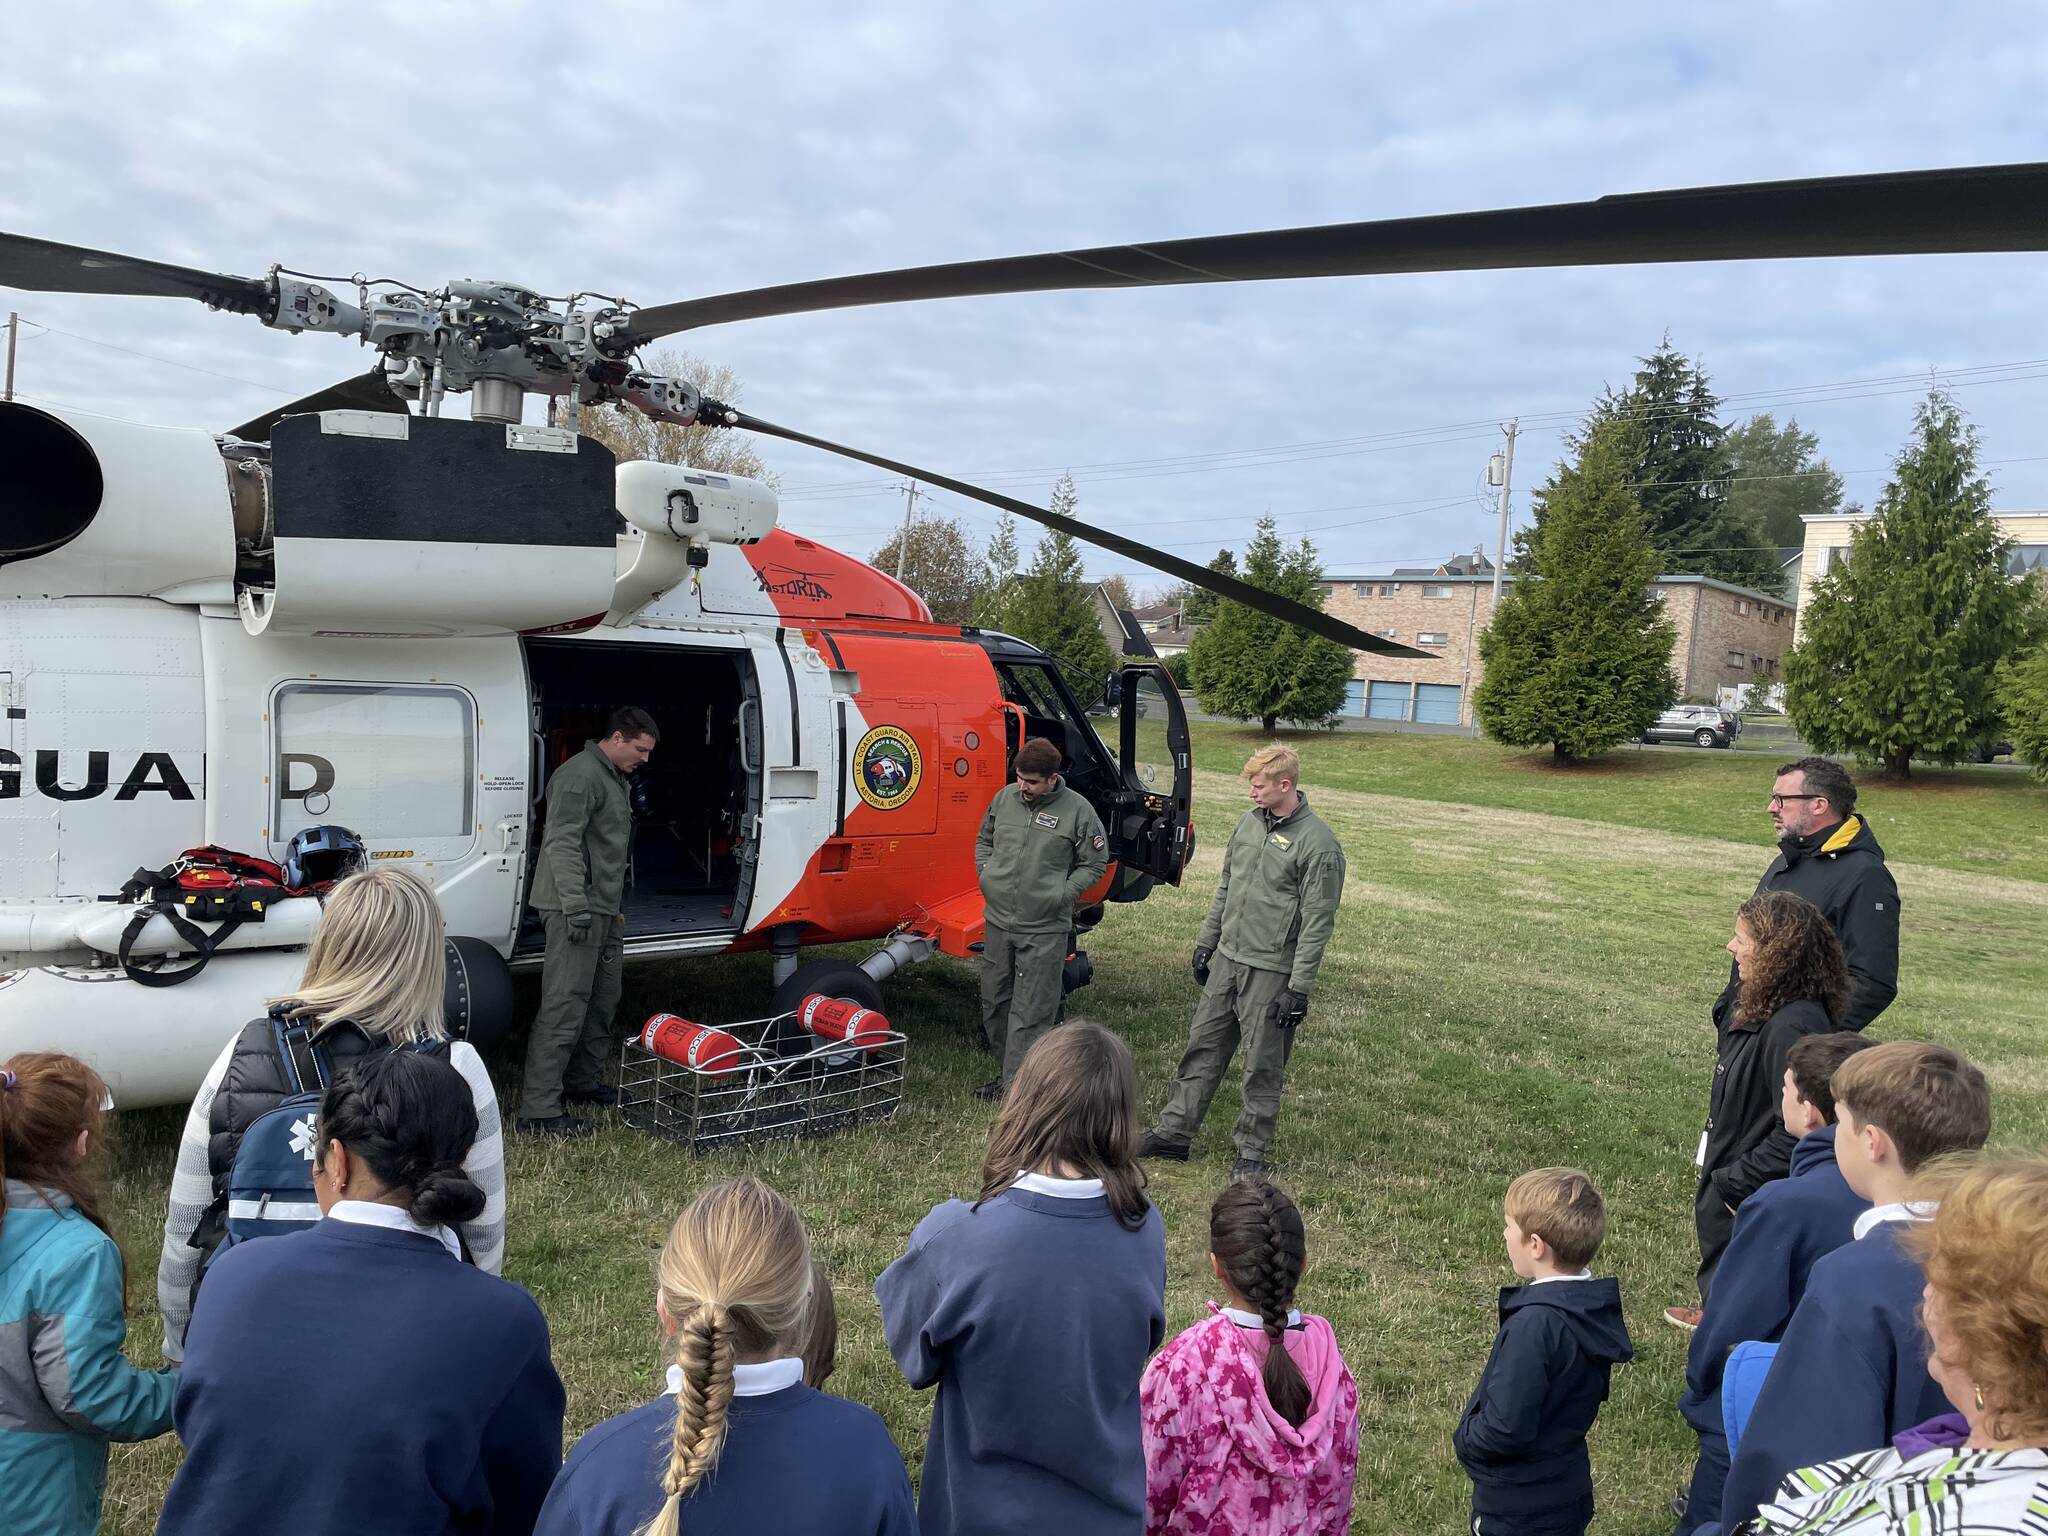 Michael S. Lockett / The Daily World 
Students from St. Mary School talk to the aircrew of an MH-60 Jayhawk from Coast Guard Air Station Astoria that visited Aberdeen as part of a Veterans Day ceremony on Nov. 10.